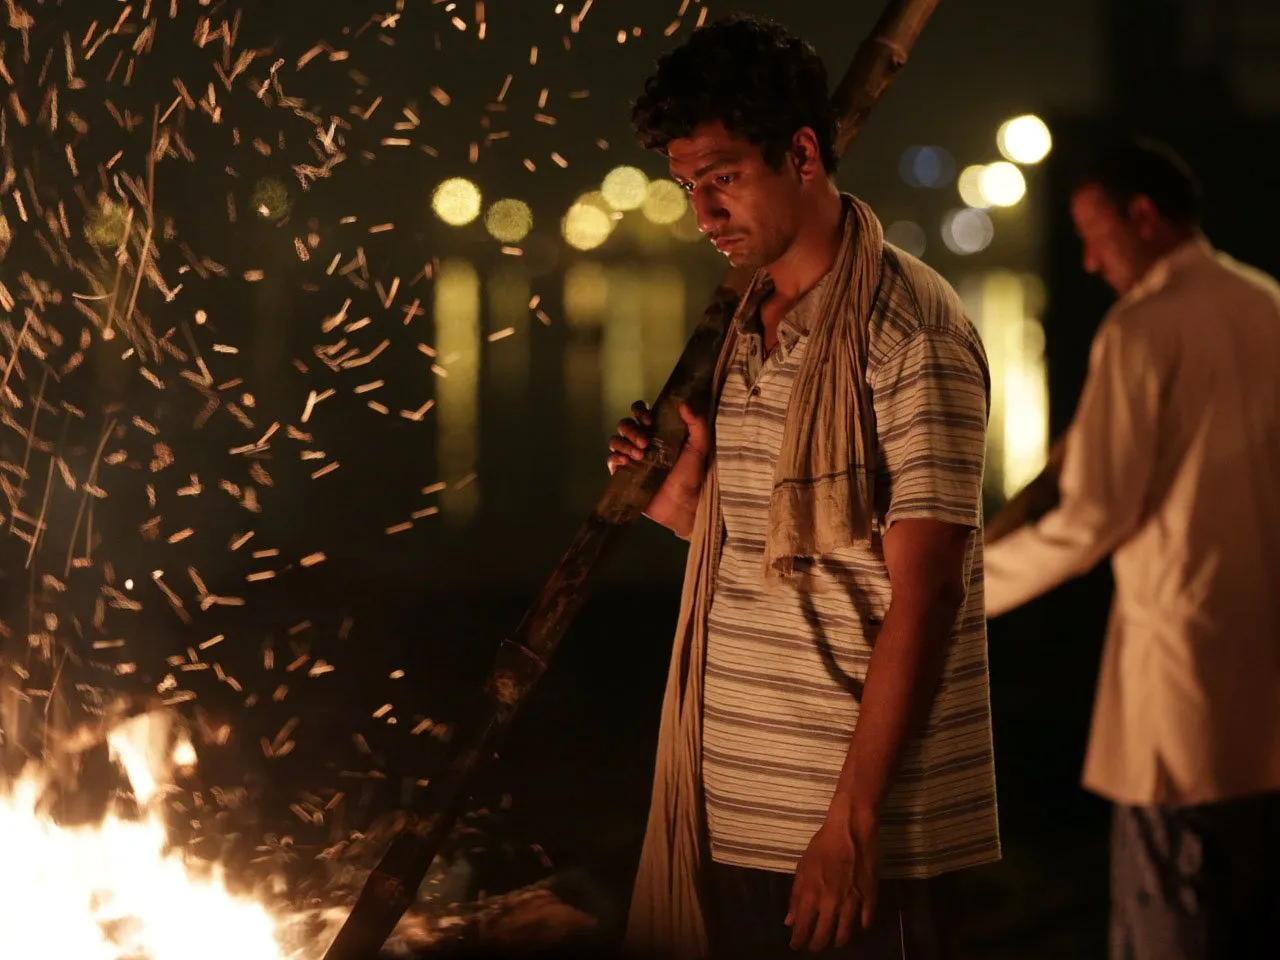 'Masaan' seizes the essence of a city older than history and traditions, Varanasi! Let's have a look at shooting locations of Masaan!